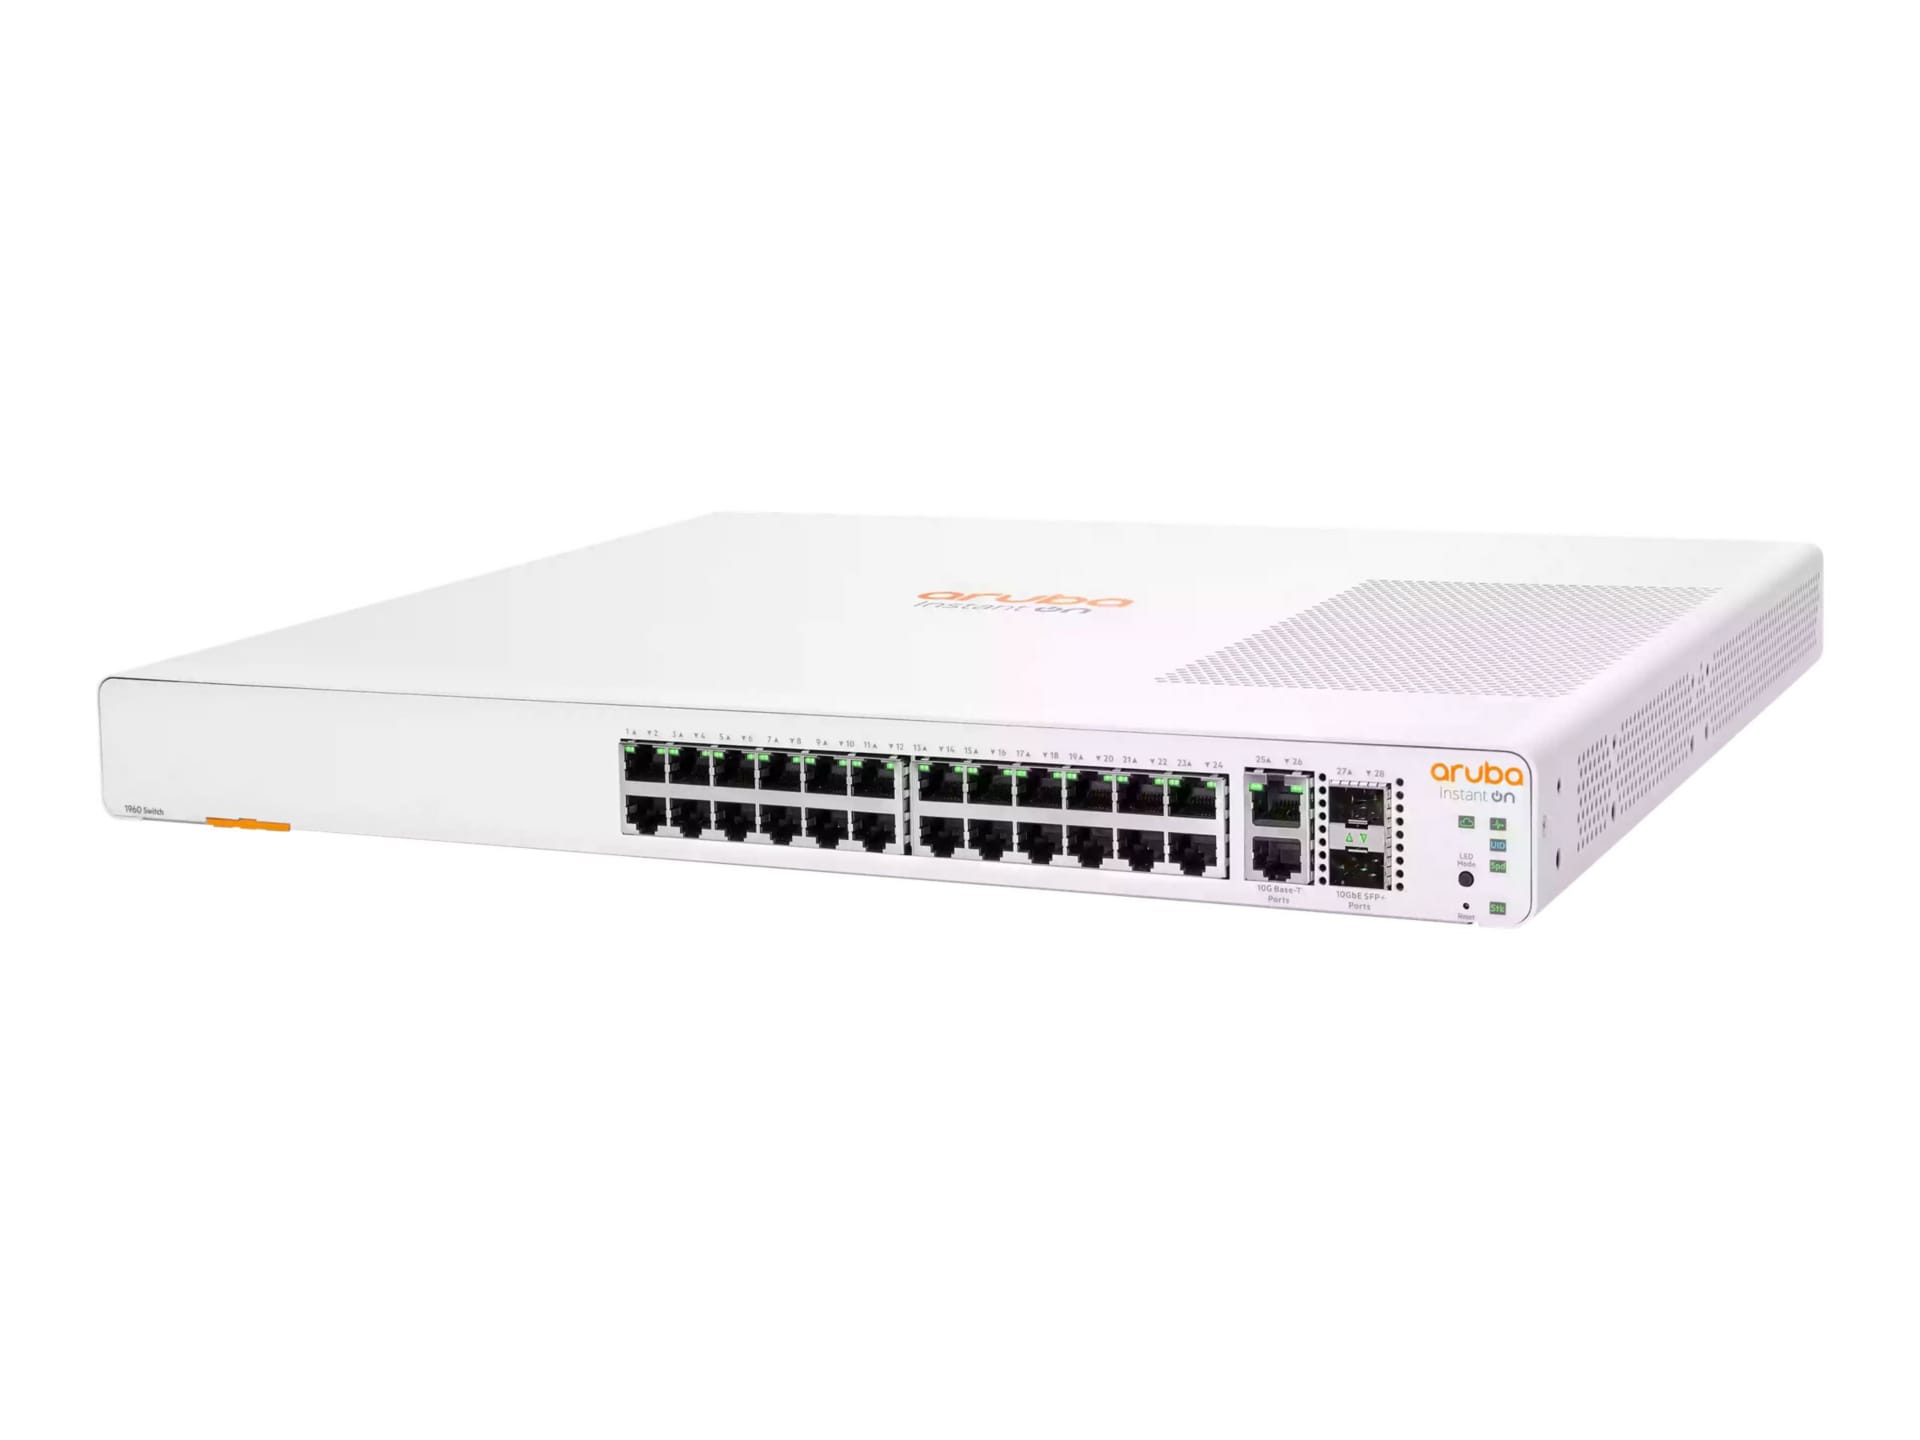 HPE HPE Networking Instant On 1960 24G 2XGT 2SFP+ Switch - switch - 24 ports - managed - rack-mountable